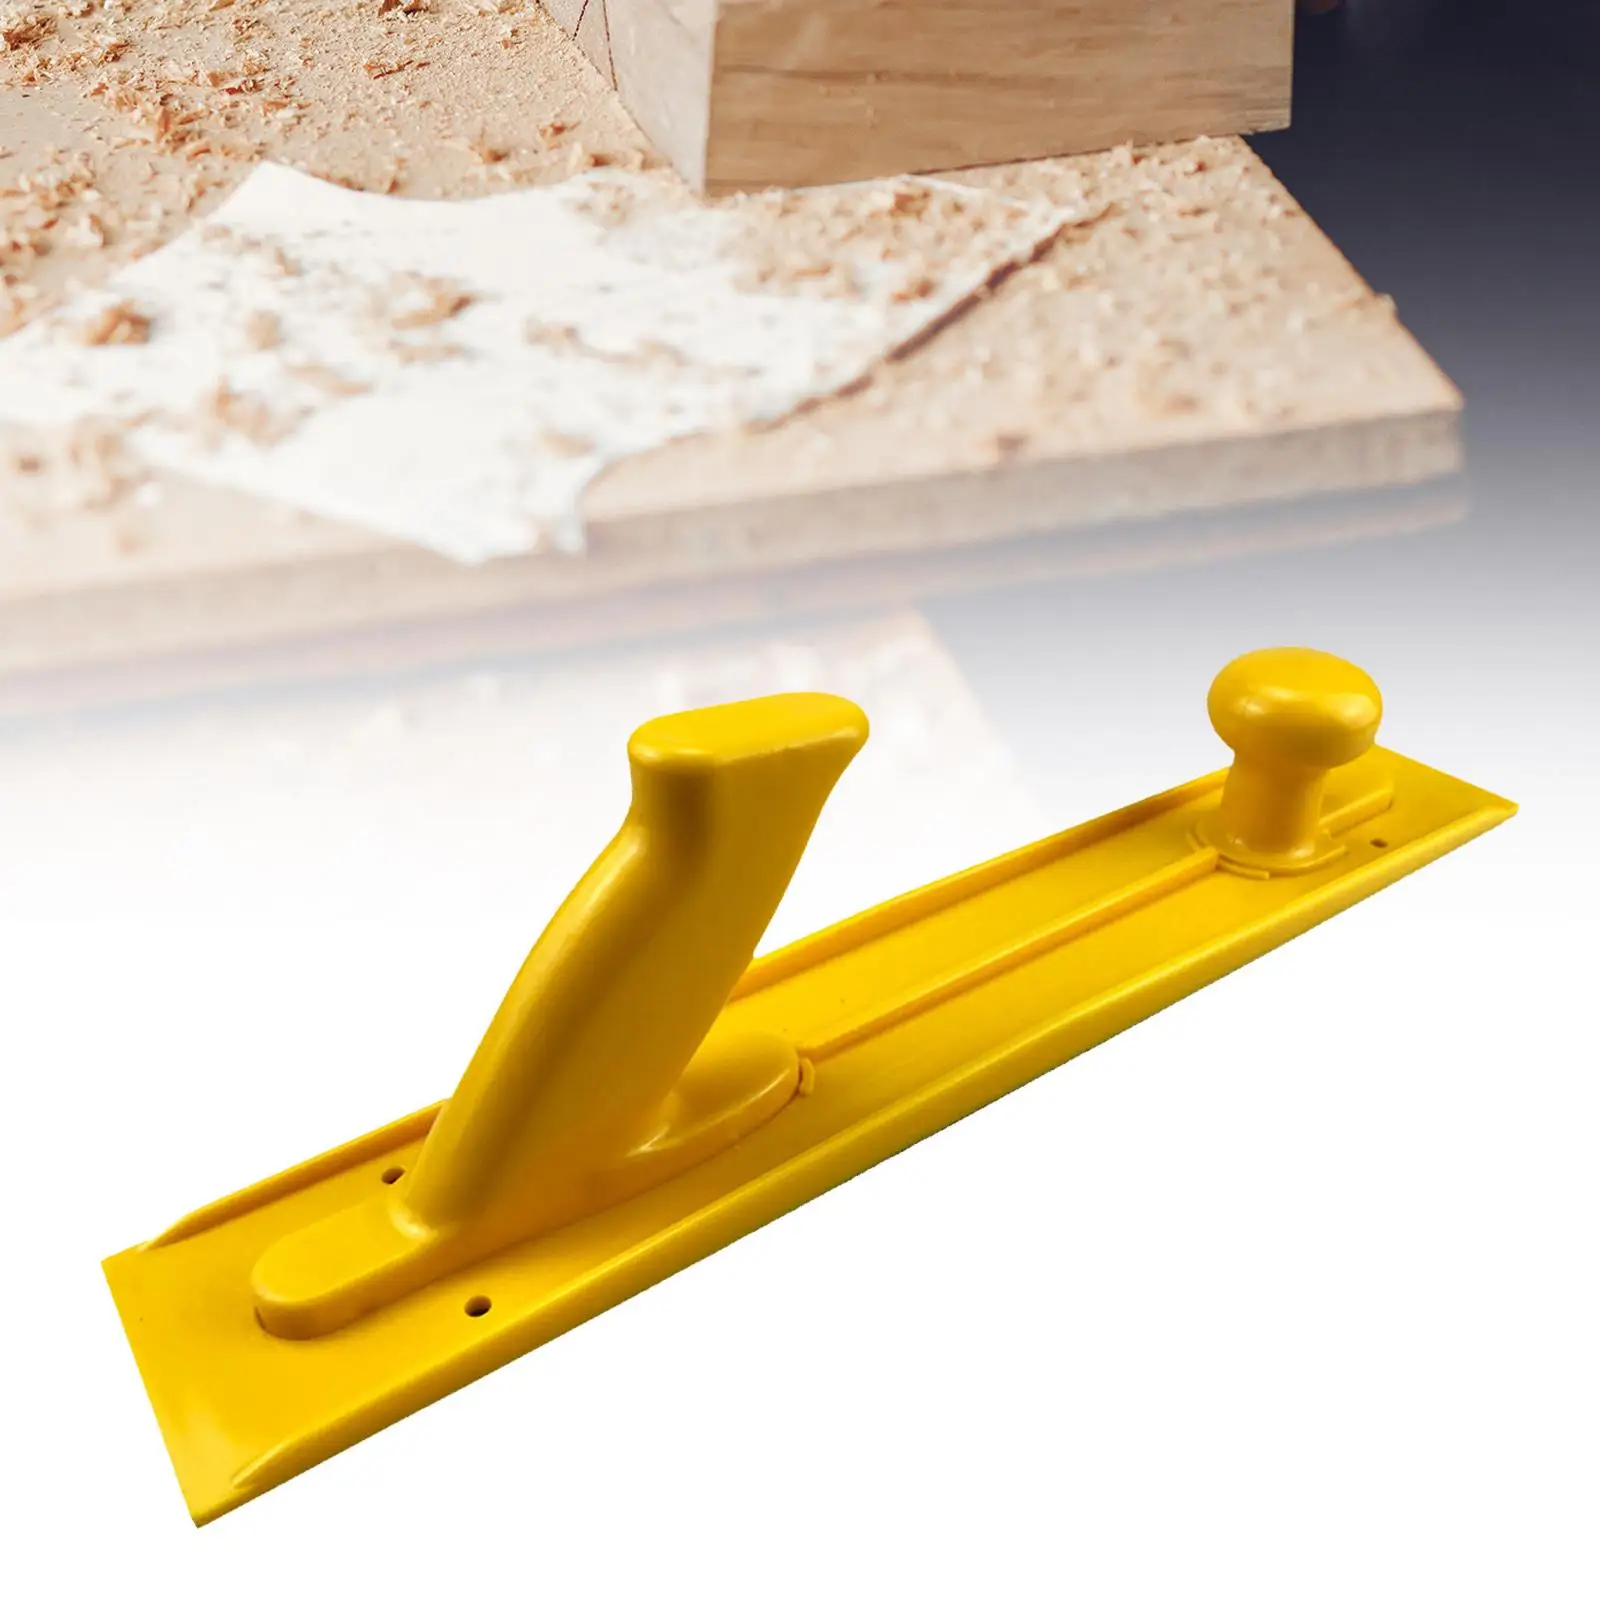 Push Handle Hand Sanders Sanding Blocks for Face Jointing Ripping Plywood Table Woodworkers Woodworking Tools